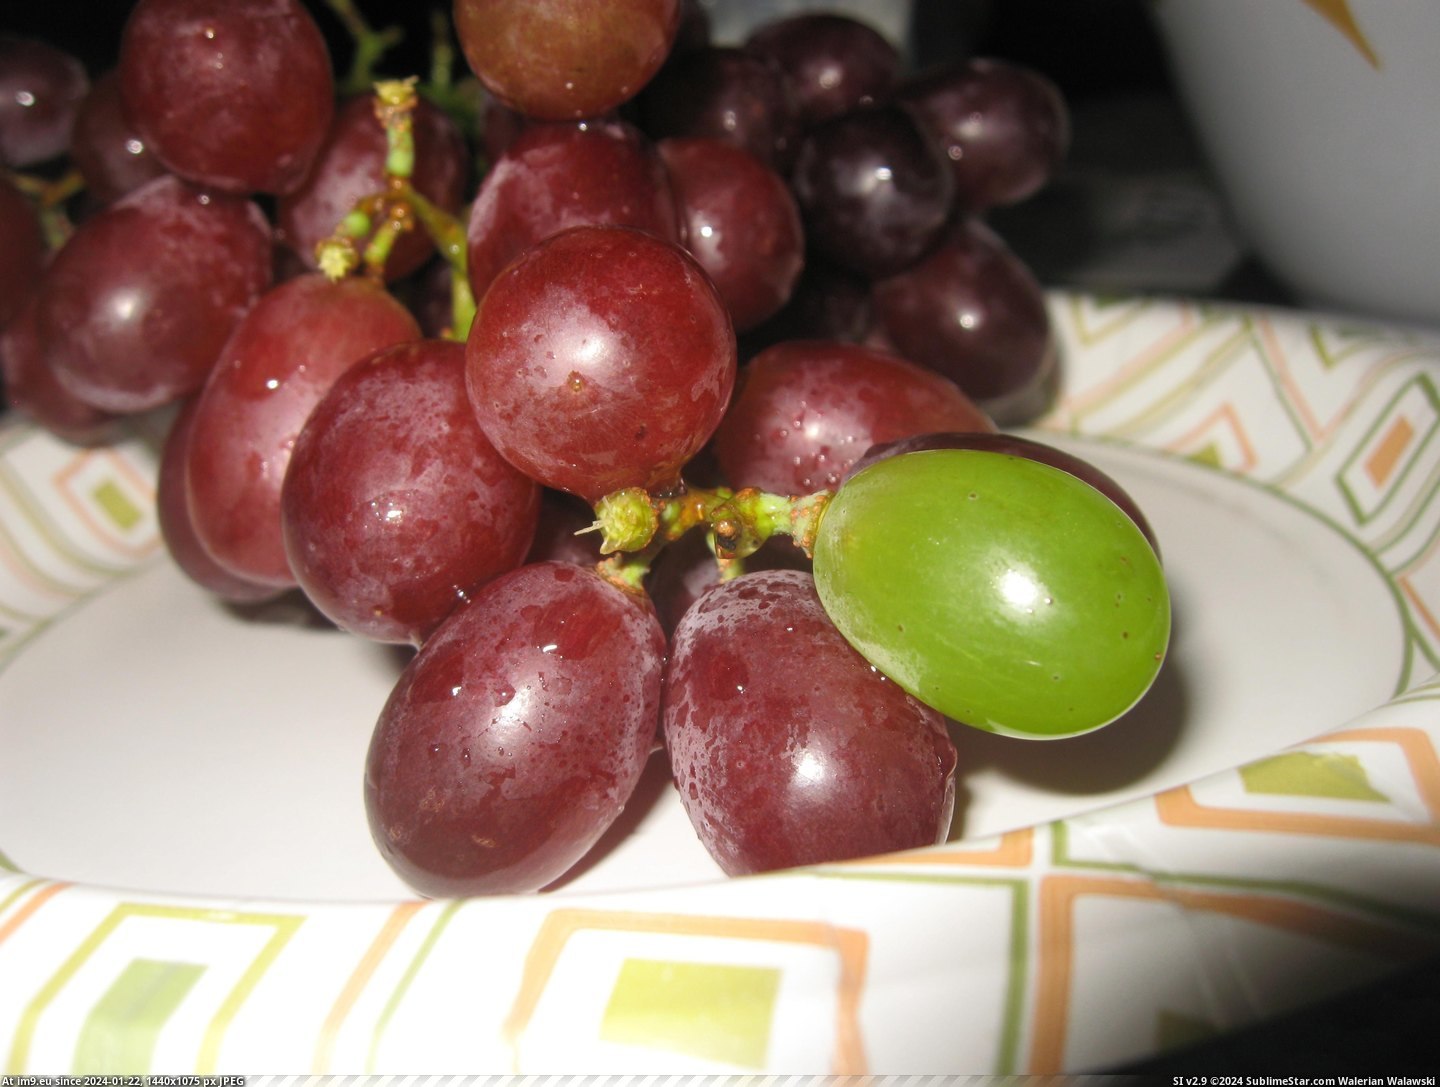 #One #Green #Grapes #Grape #Cluster #Purple #Growing [Mildlyinteresting] I found one green grape growing on a cluster of purple grapes Pic. (Изображение из альбом My r/MILDLYINTERESTING favs))